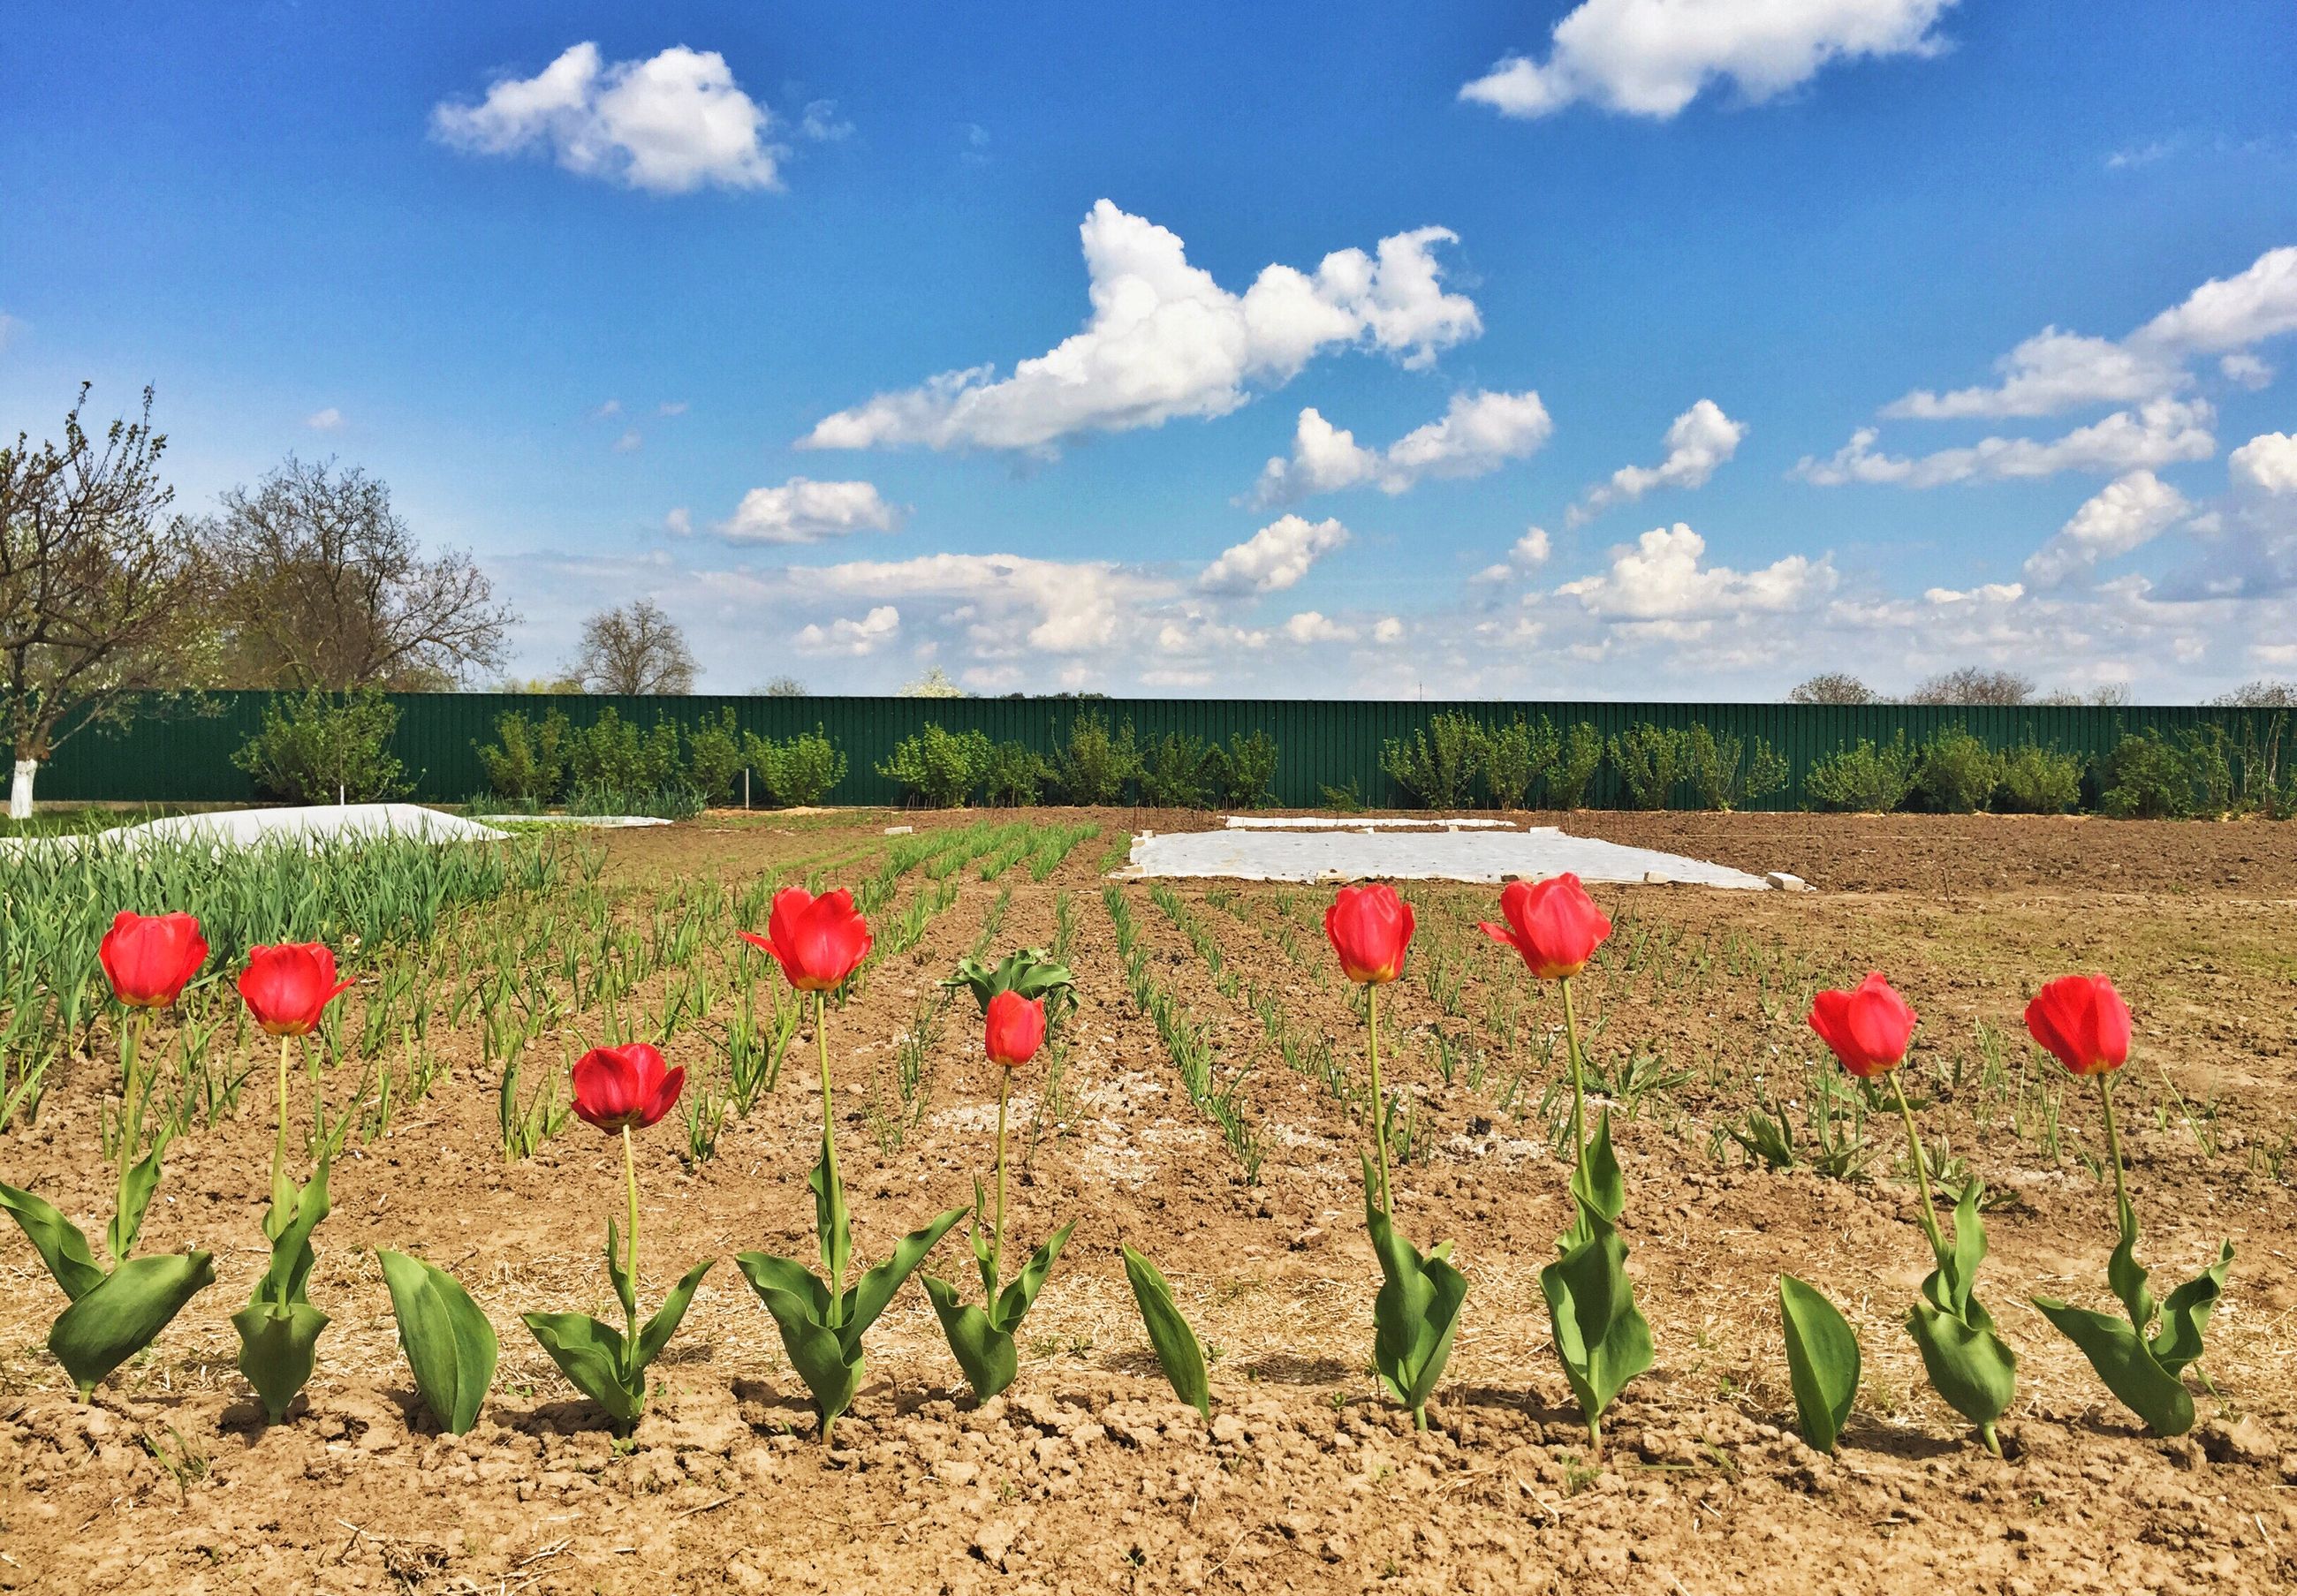 flower, growth, sky, field, red, beauty in nature, freshness, plant, nature, cloud - sky, tranquility, rural scene, agriculture, landscape, fragility, tulip, tranquil scene, petal, day, abundance